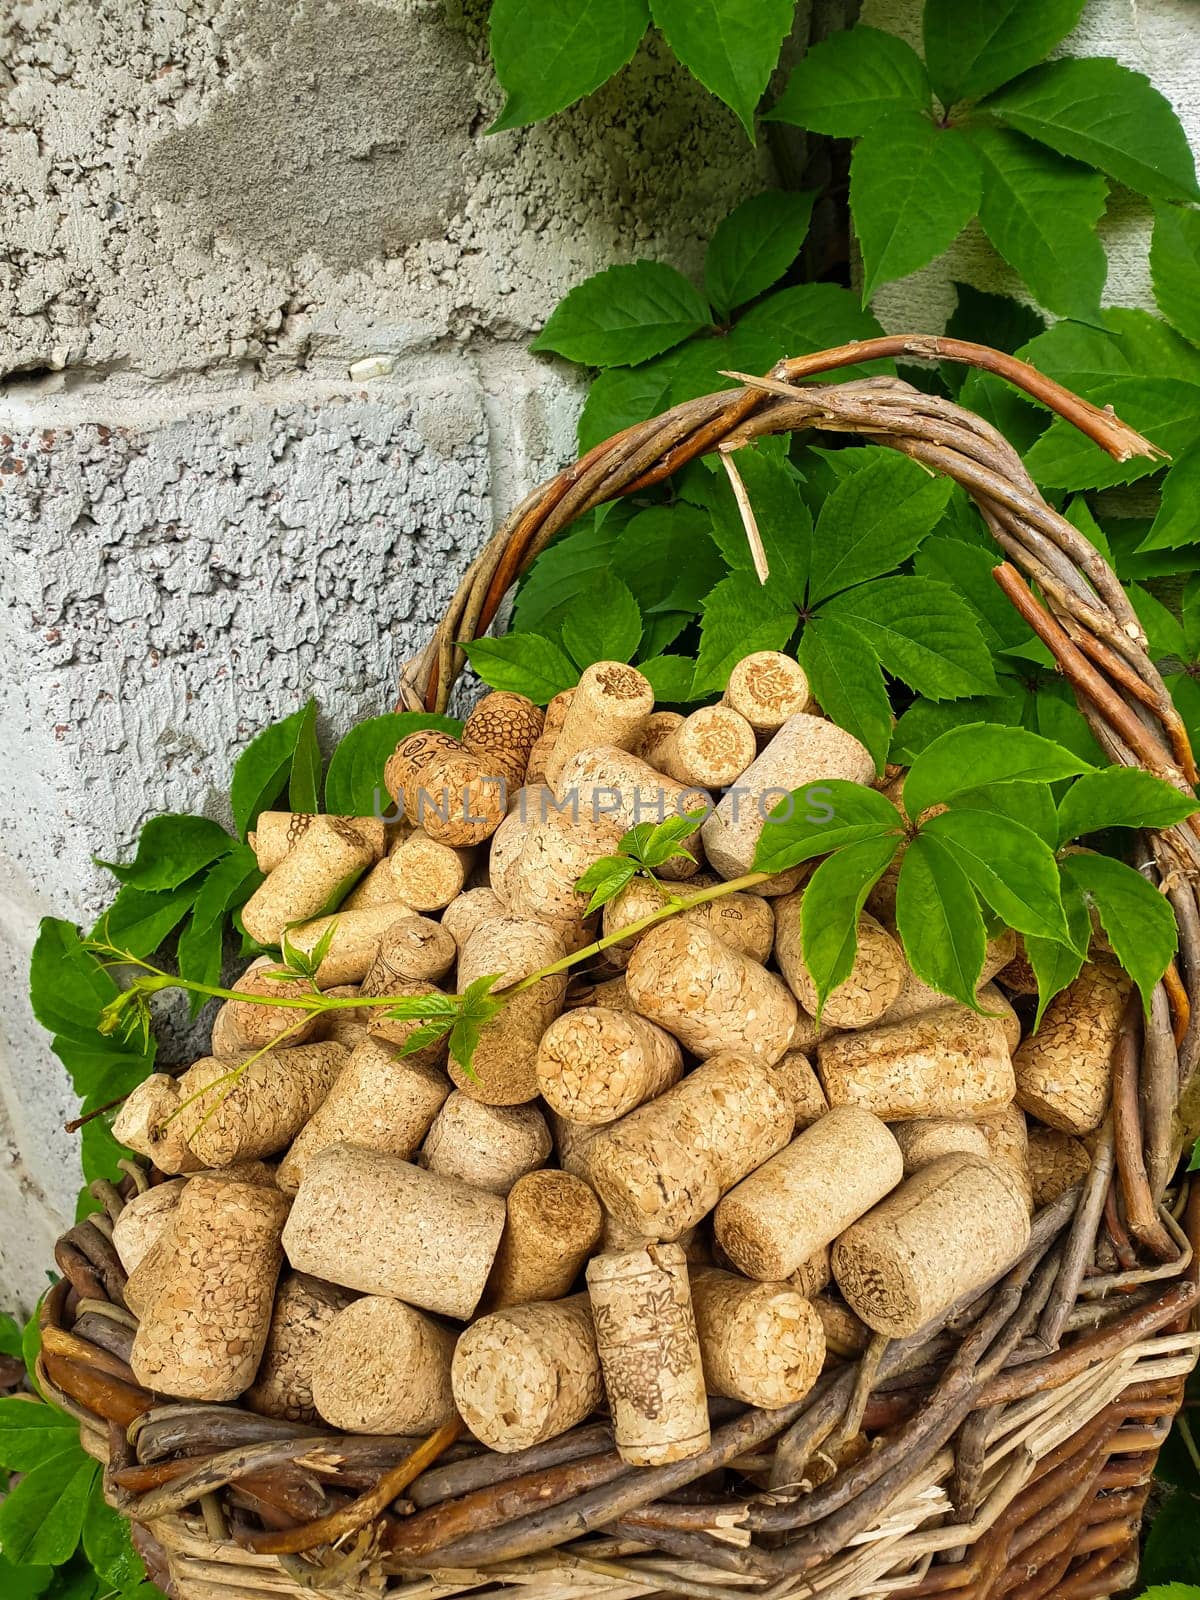 There are wine corks in an old wicker basket. Grapes entwine a basket with wine corks. by Spirina